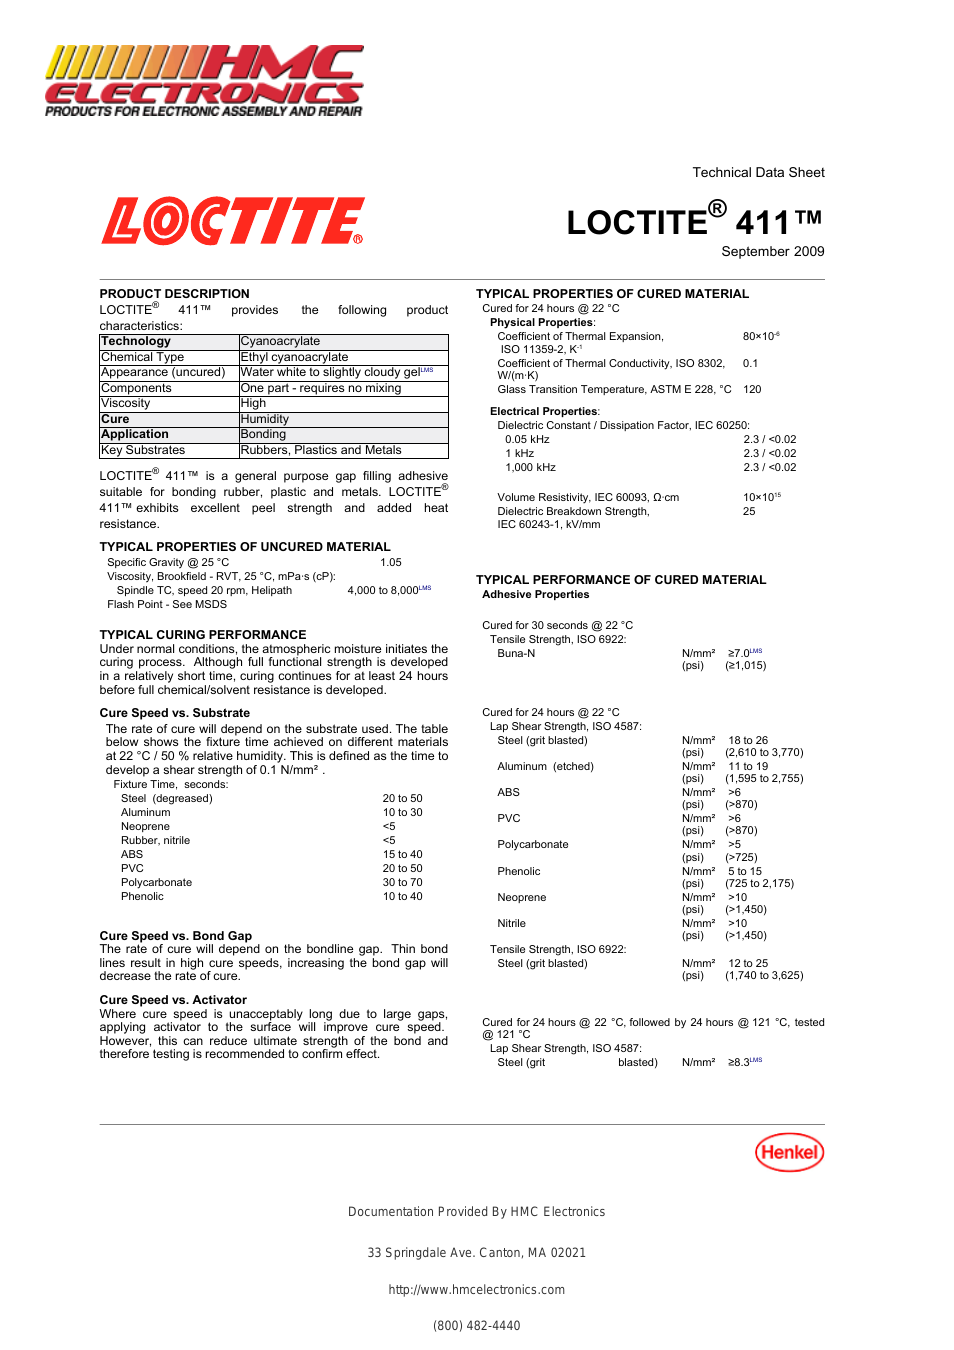 41145 Loctite 411 Prism Instant Adhesive, Toughened, (Clear) Gap Filling